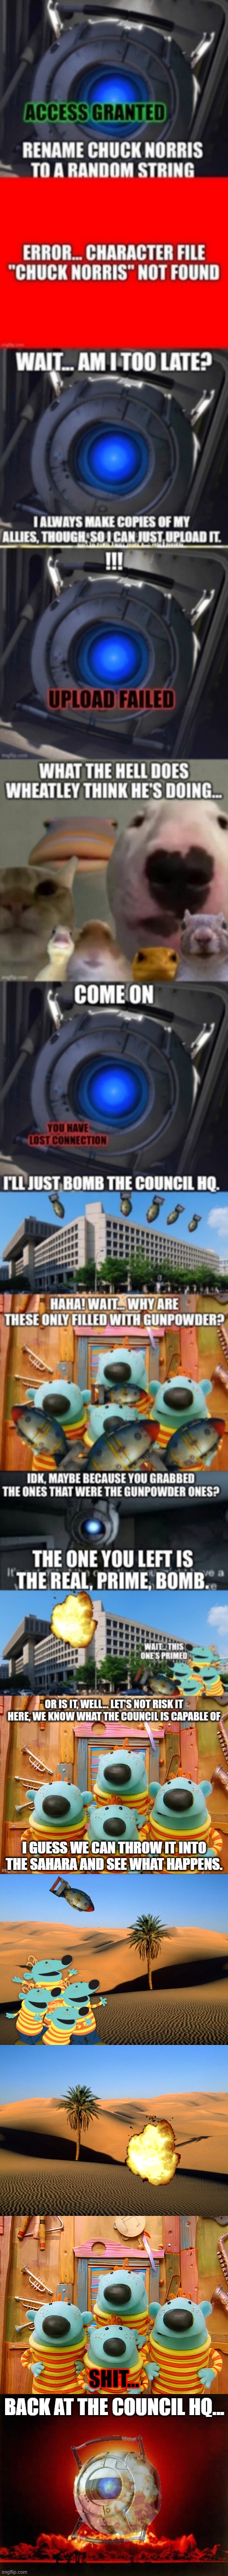 We had the right one | I GUESS WE CAN THROW IT INTO THE SAHARA AND SEE WHAT HAPPENS. SHIT... BACK AT THE COUNCIL HQ... | image tagged in sahara desert,schwartzman quartet,memes,nuclear explosion | made w/ Imgflip meme maker